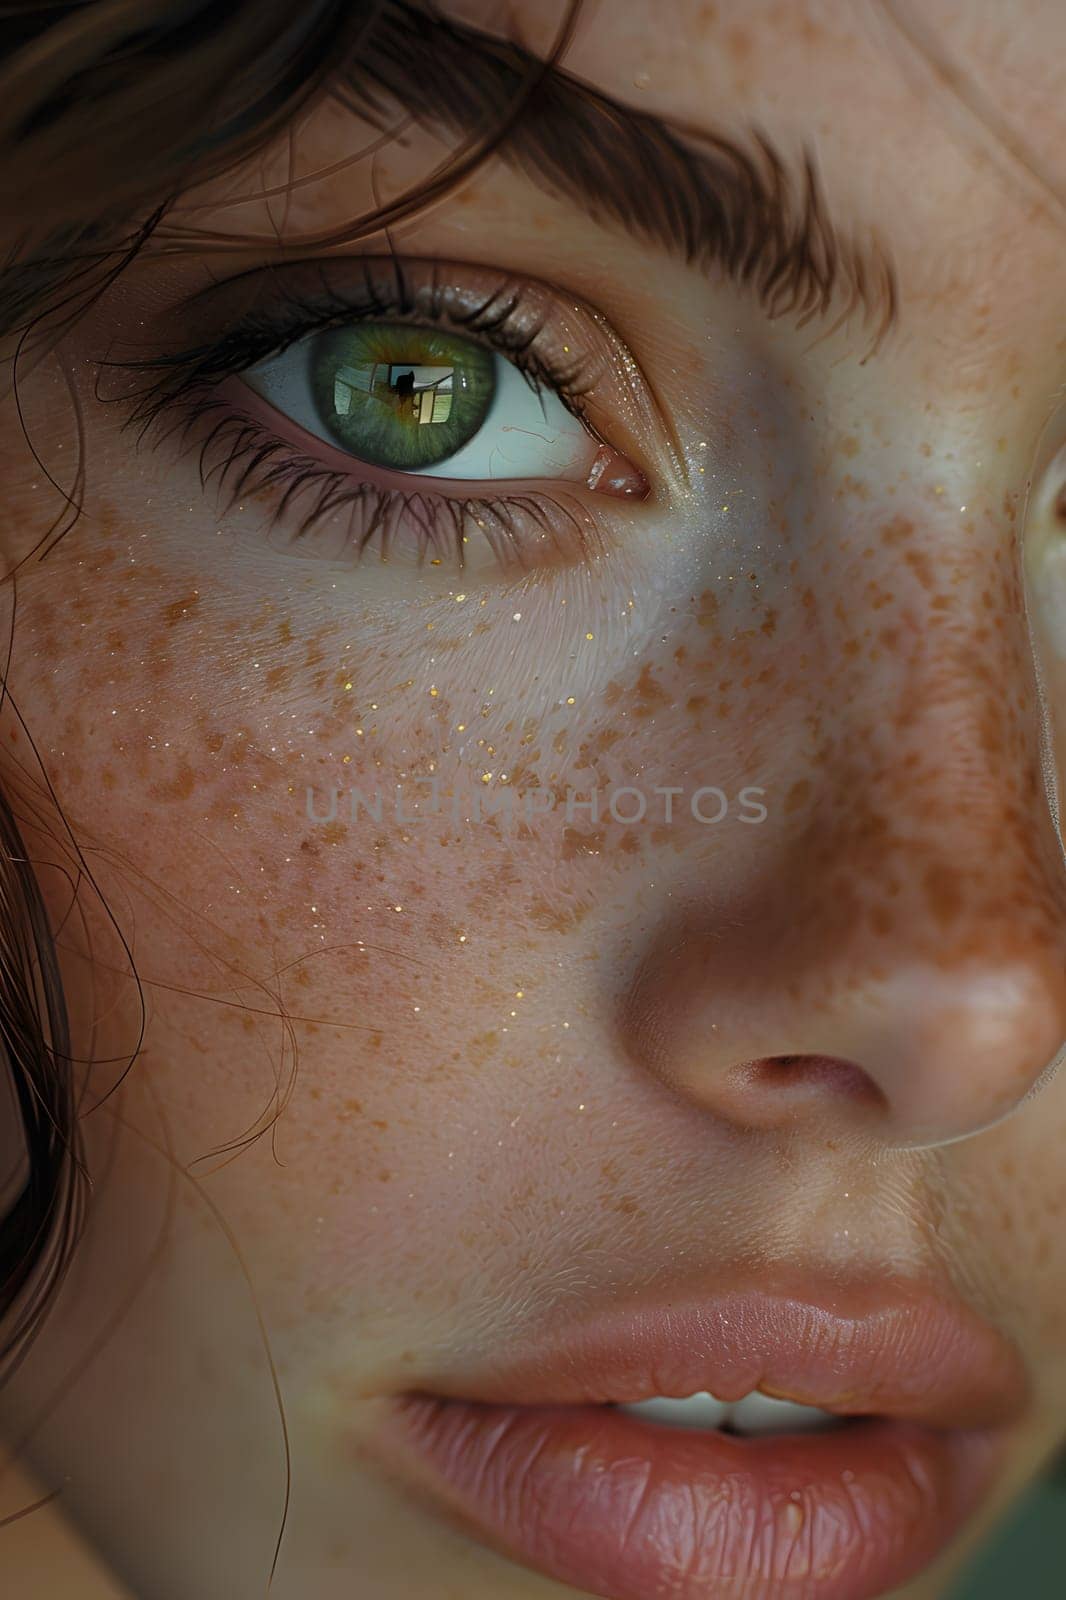 A closeup image of a womans face reveals green eyes, freckles on her skin, and defined eyebrows and eyelashes